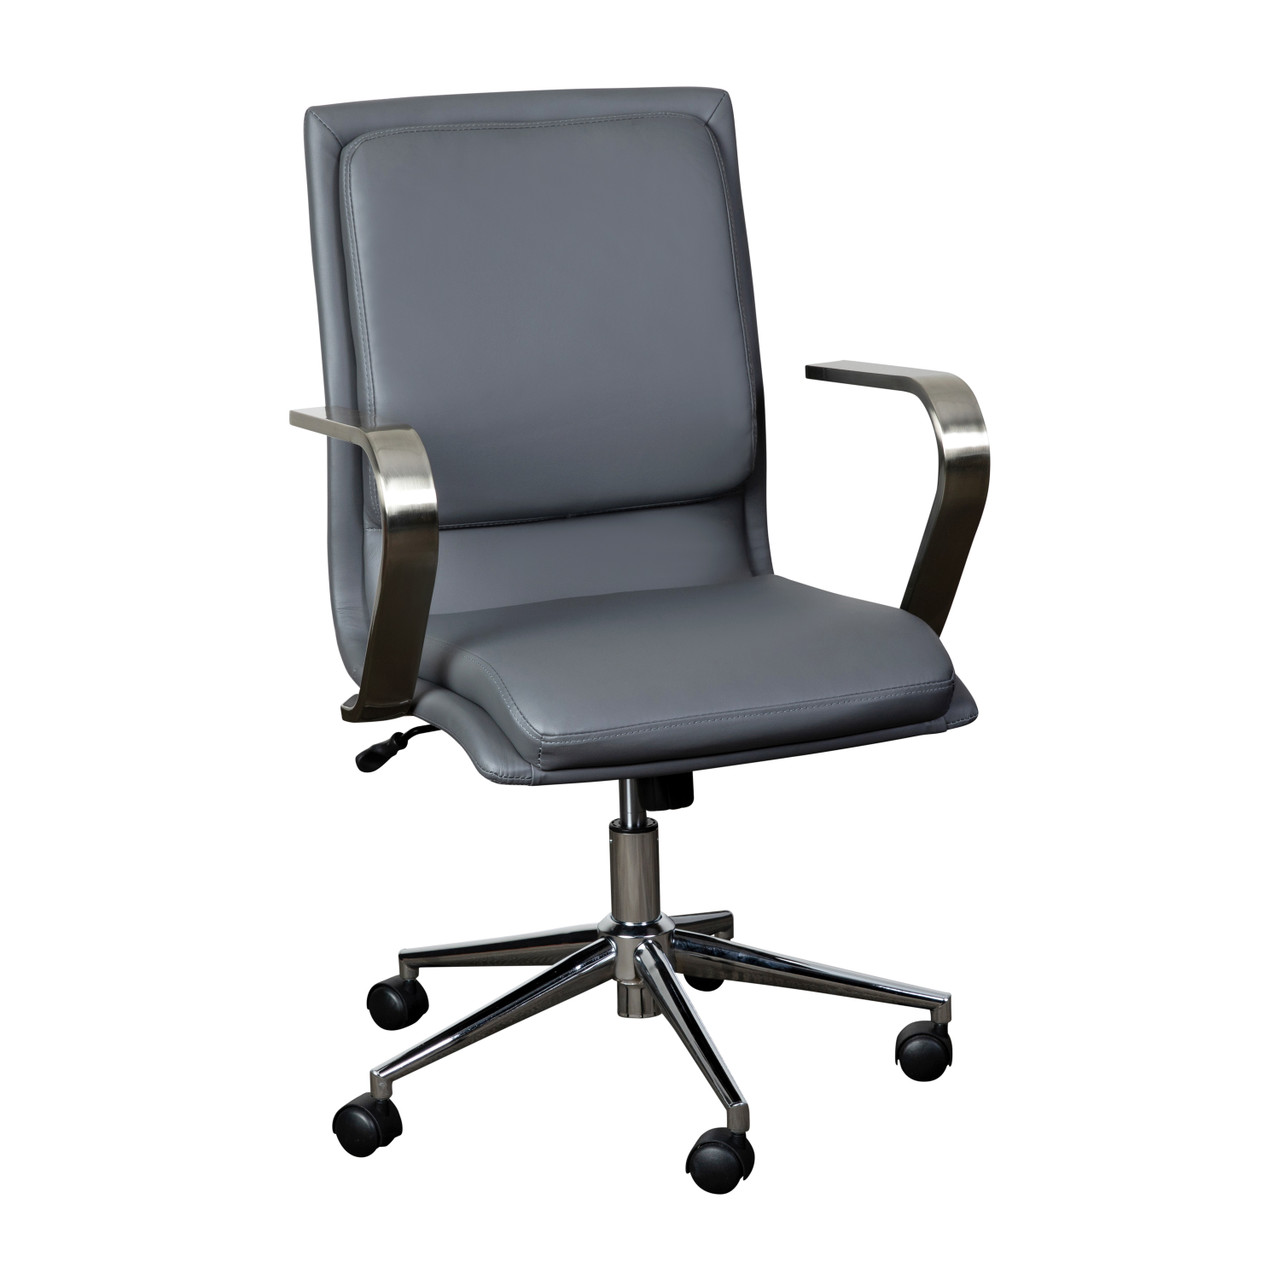 Flash Furniture James Mid-Back Designer Executive LeatherSoft Office Chair w/ Brushed Chrome Base & Arms, Gray, Model# GO-21111B-GY-CHR-GG